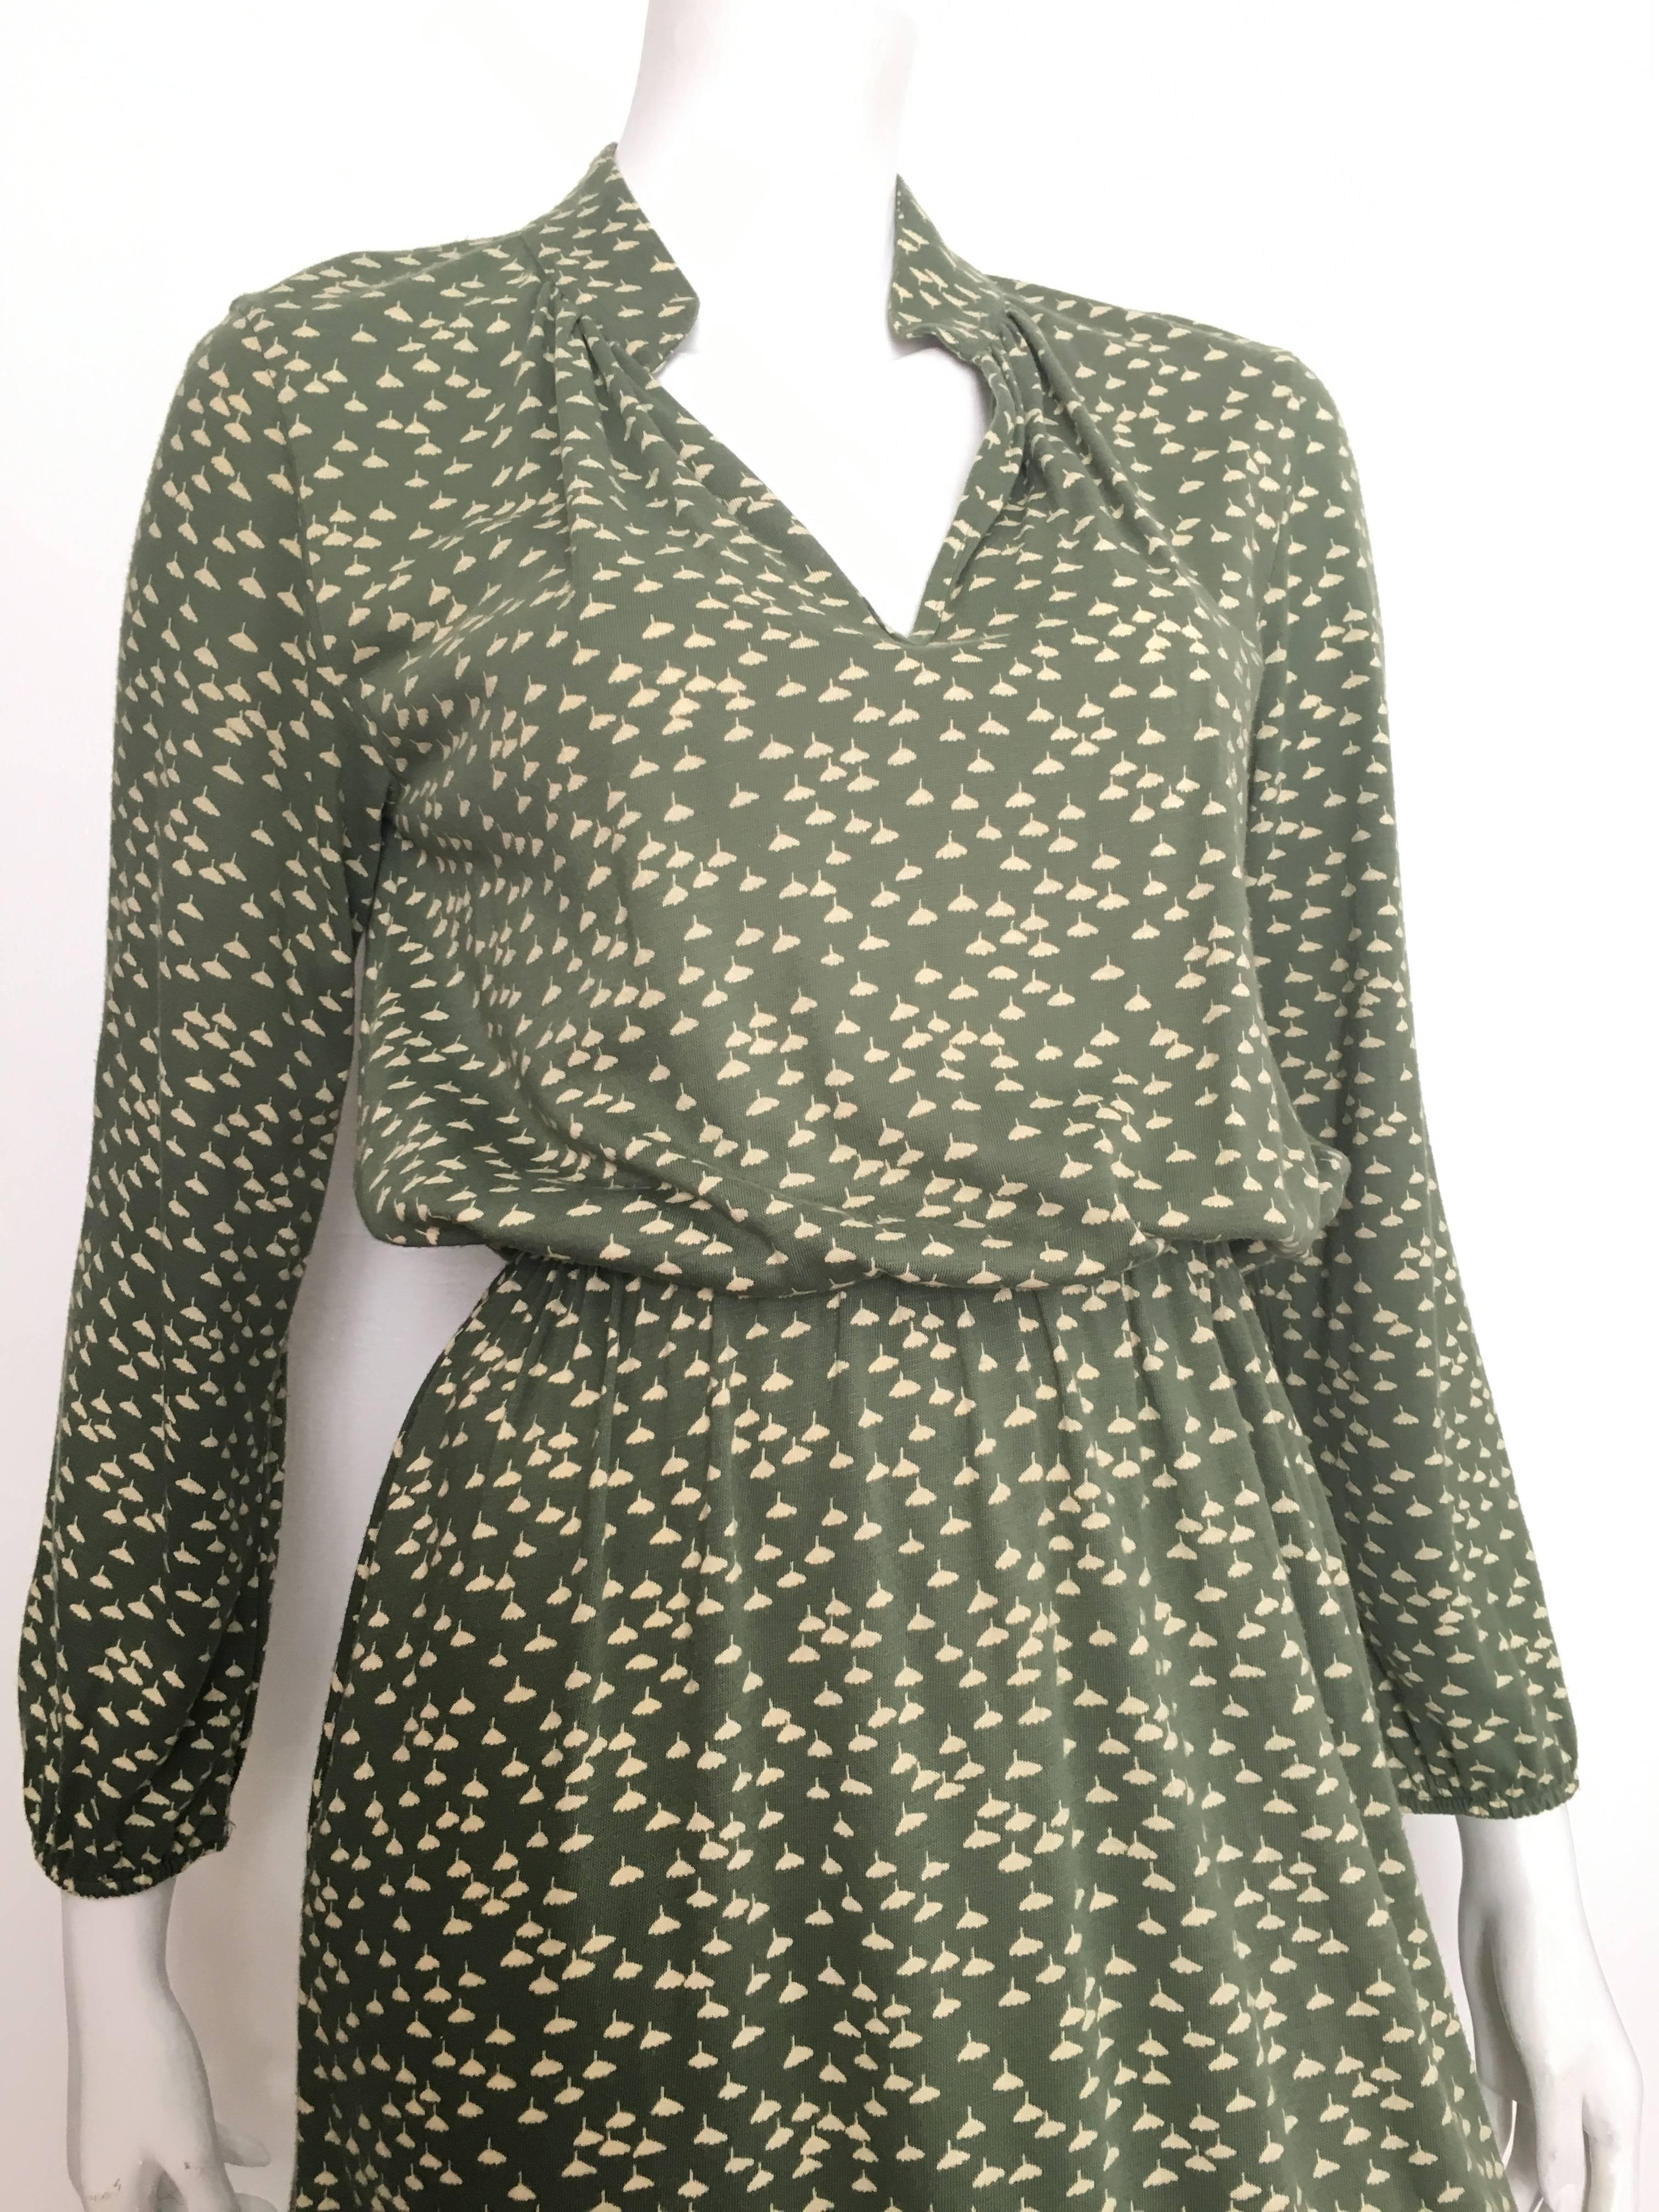 Diane von Furstenberg 1970s casual day dress with flower pattern & pockets is a size 4. Both waist and sleeves have an elastic band. This dress was designed at the beginning of Diane von Furstenberg's fashion career. The last photo on slide shows